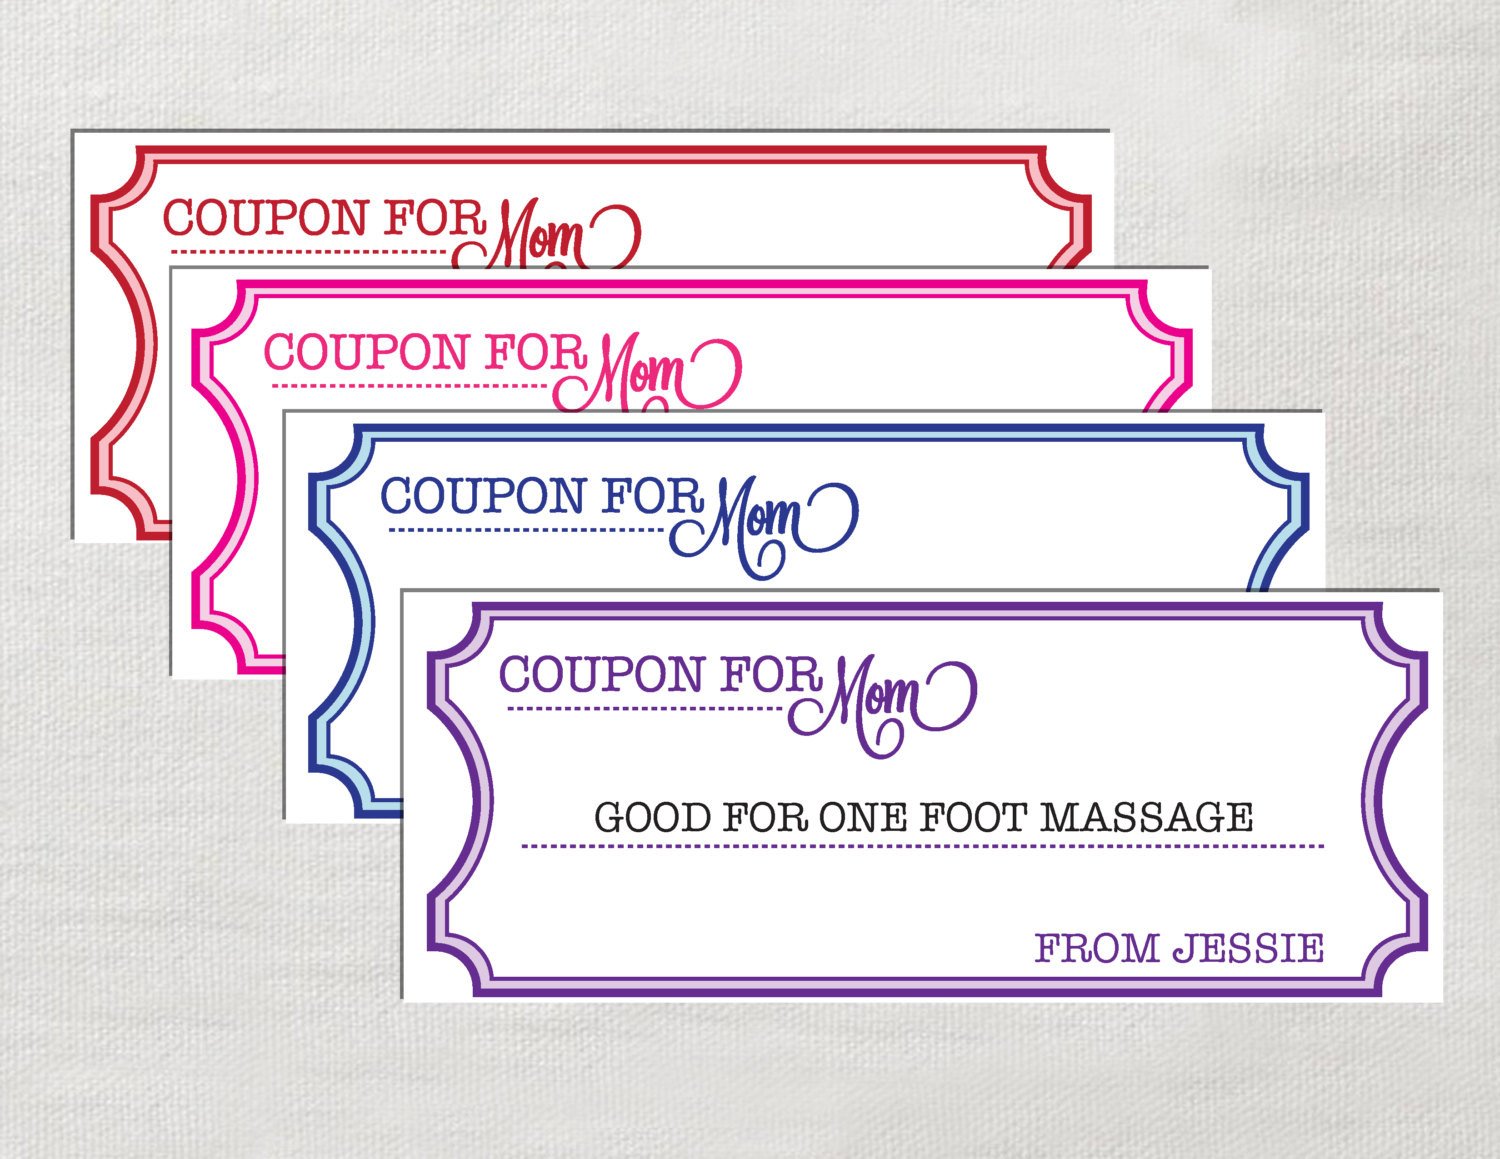 Microsoft Word Coupon Template Coupons for Mom Instant Download Editable by Laurevansdesign